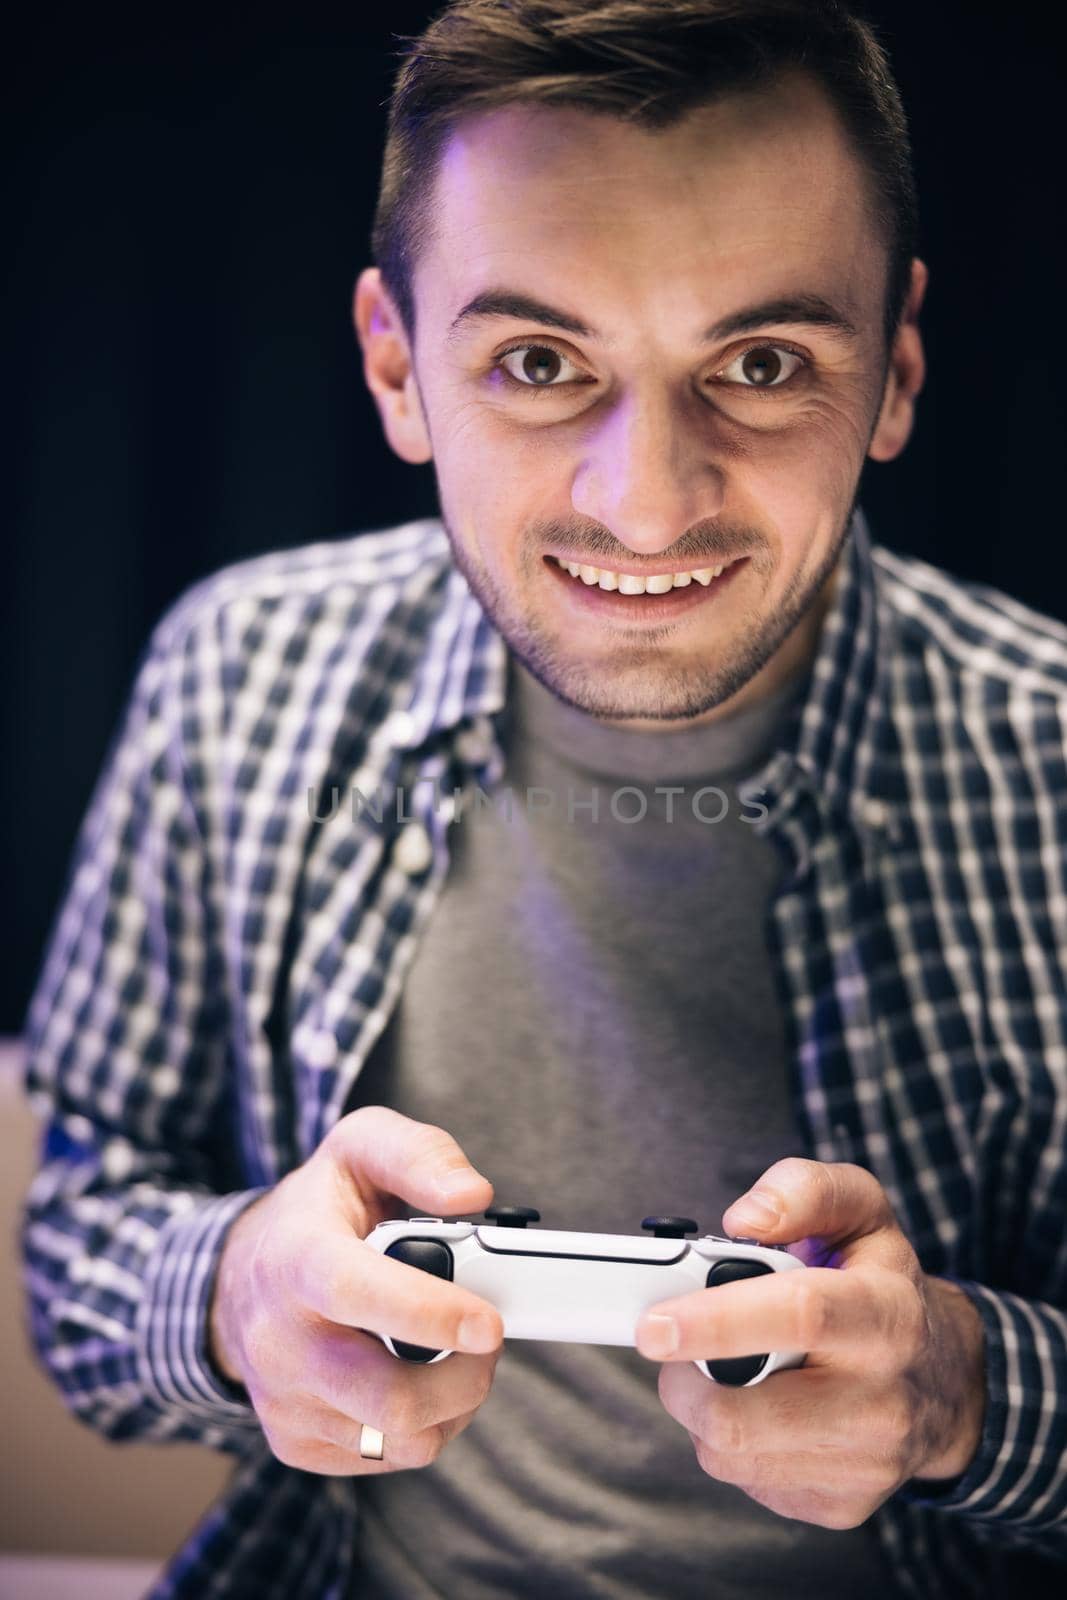 Caucasian guy addicted to tv entertainment. Male holding joystick control having fun laughing on couch indoors. Man in casual wear sitting on sofa and playing video game in home living room.